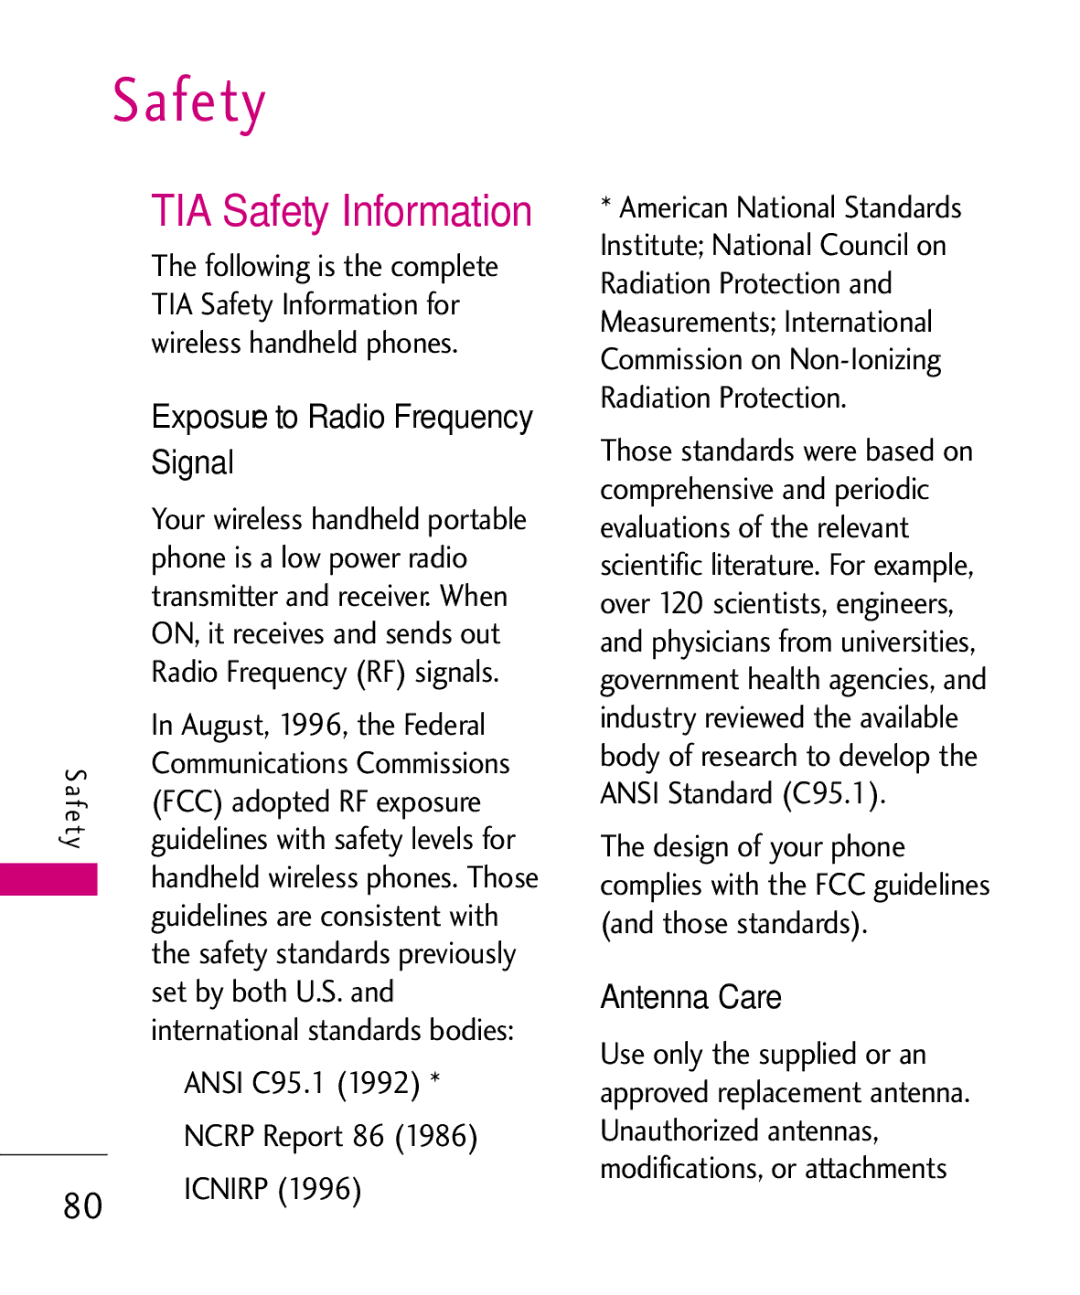 LG Electronics UN200 manual TIA Safety Information, Exposure to Radio Frequency, Antenna Care 